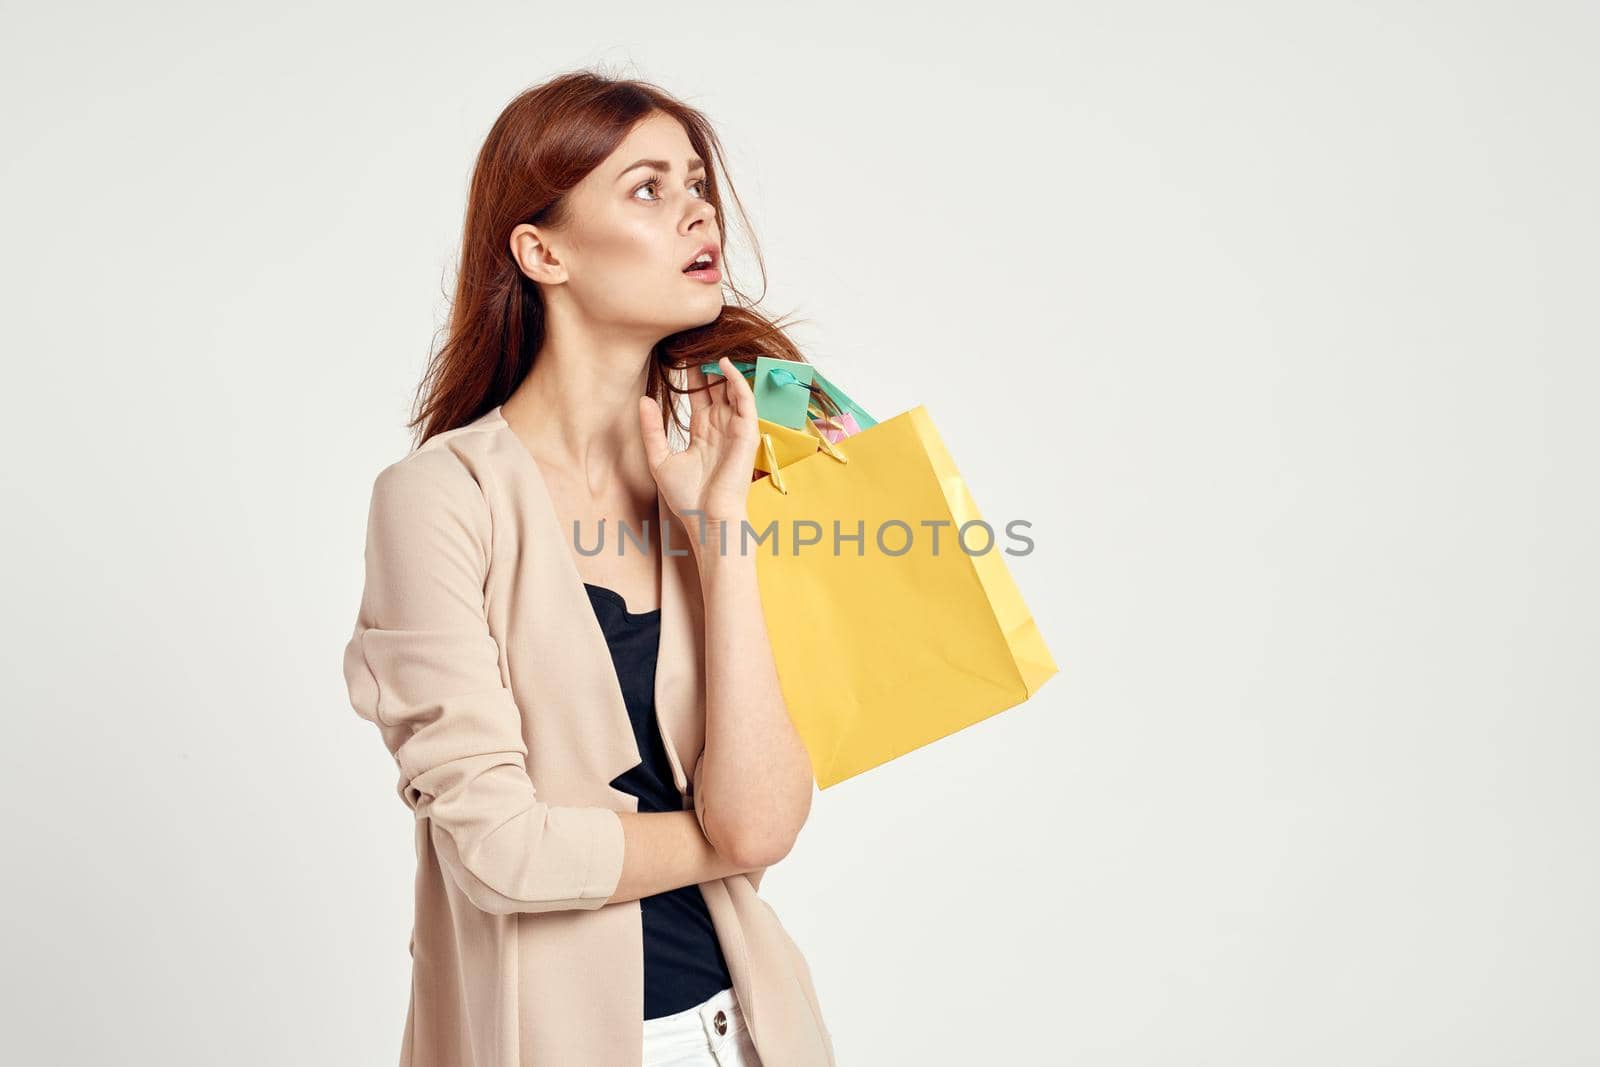 beautiful woman shopping entertainment lifestyle isolated background. High quality photo